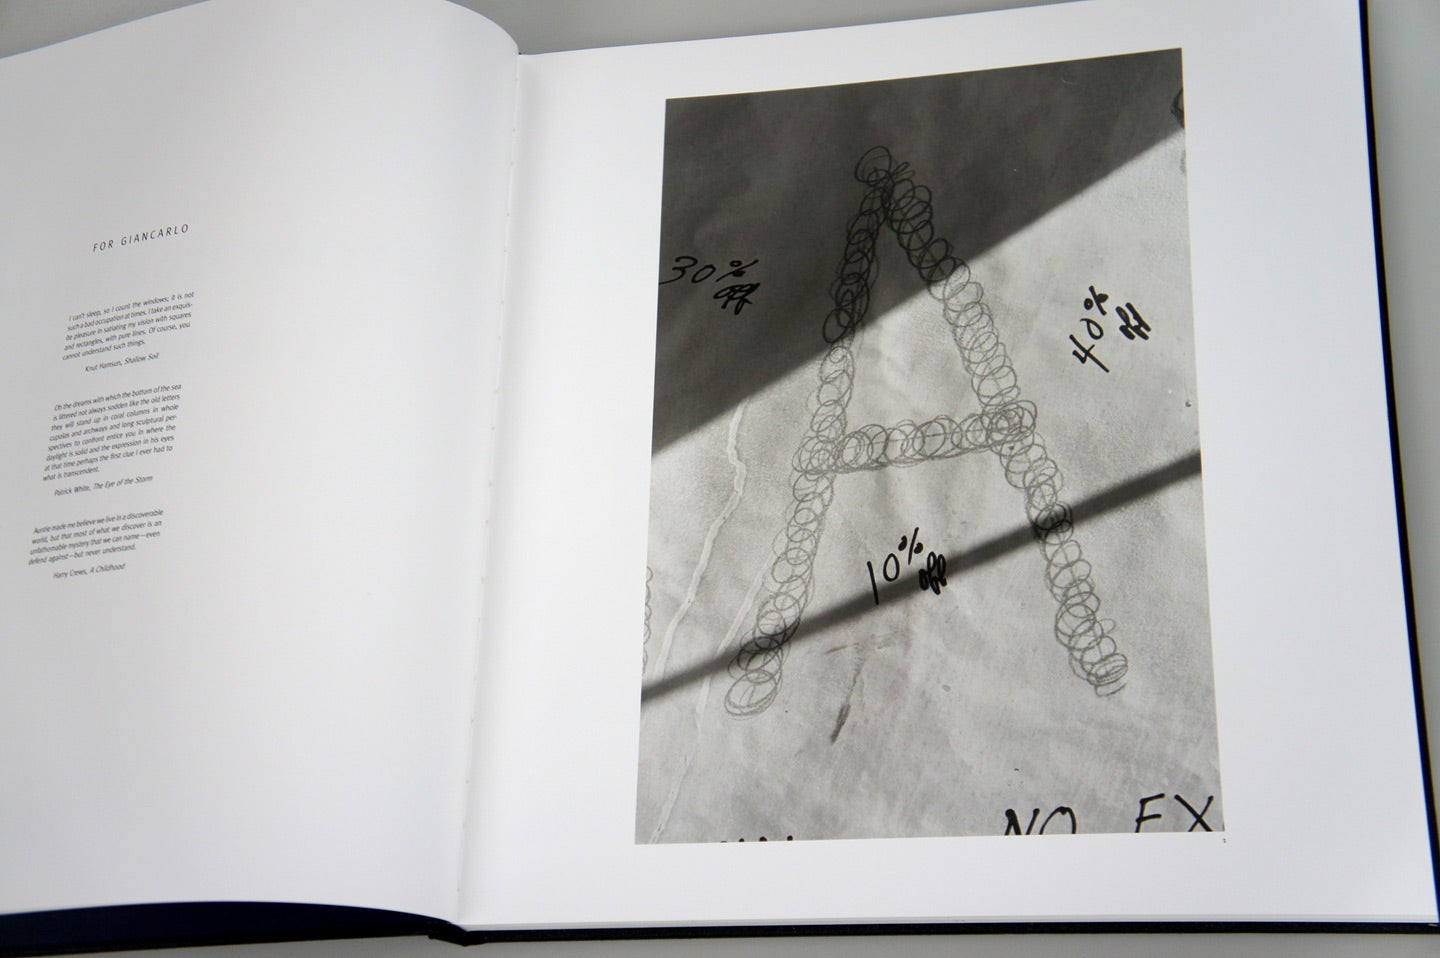 Lee Friedlander: Letters from the People (Special Limited Edition with One Vintage Gelatin Silver Print: "F")